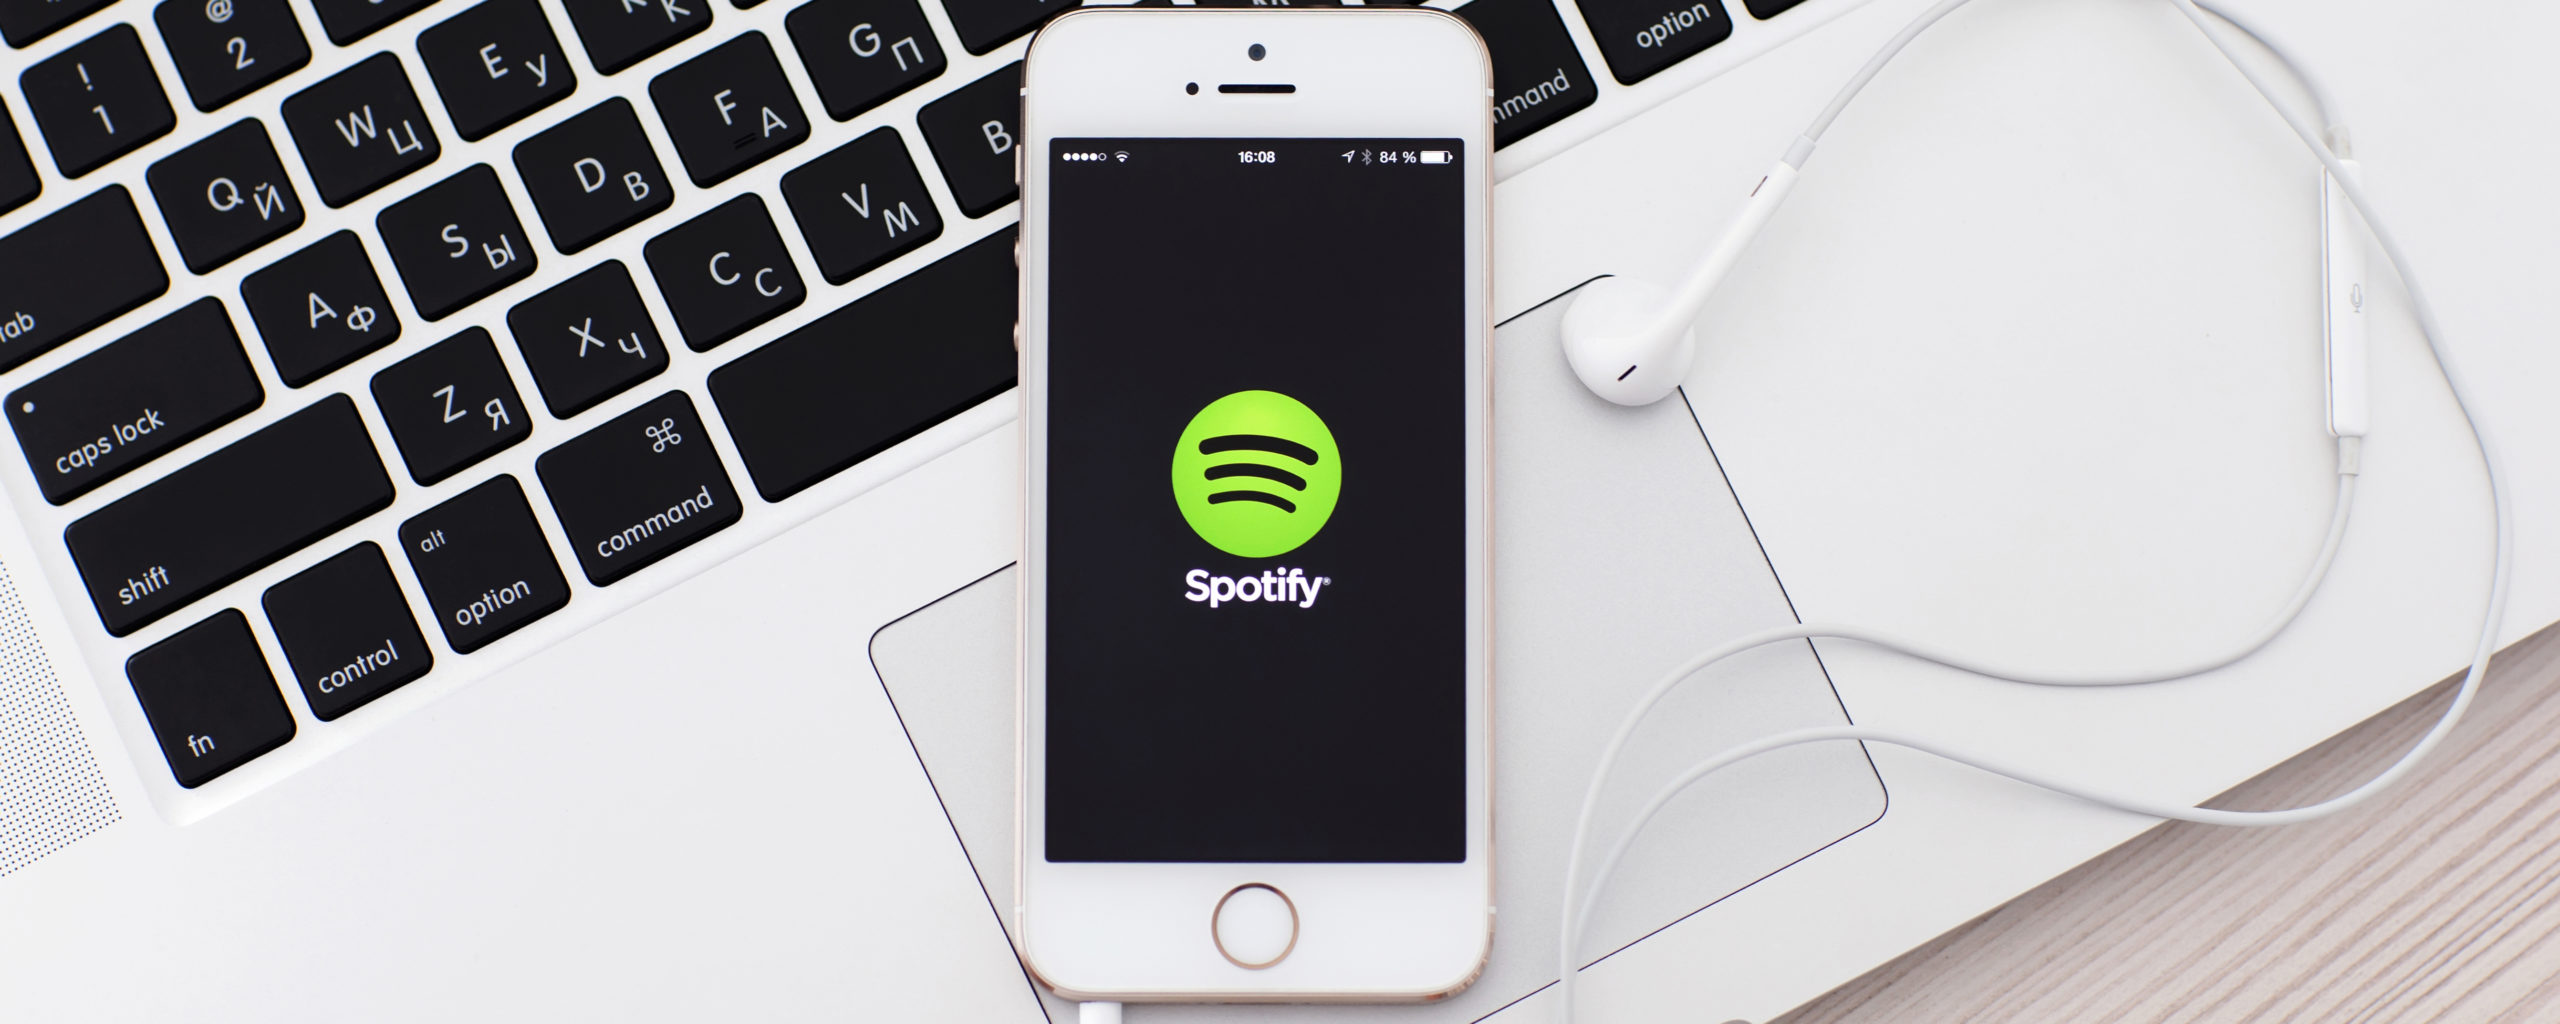 How To Download Spotify Songs On Apple Watch